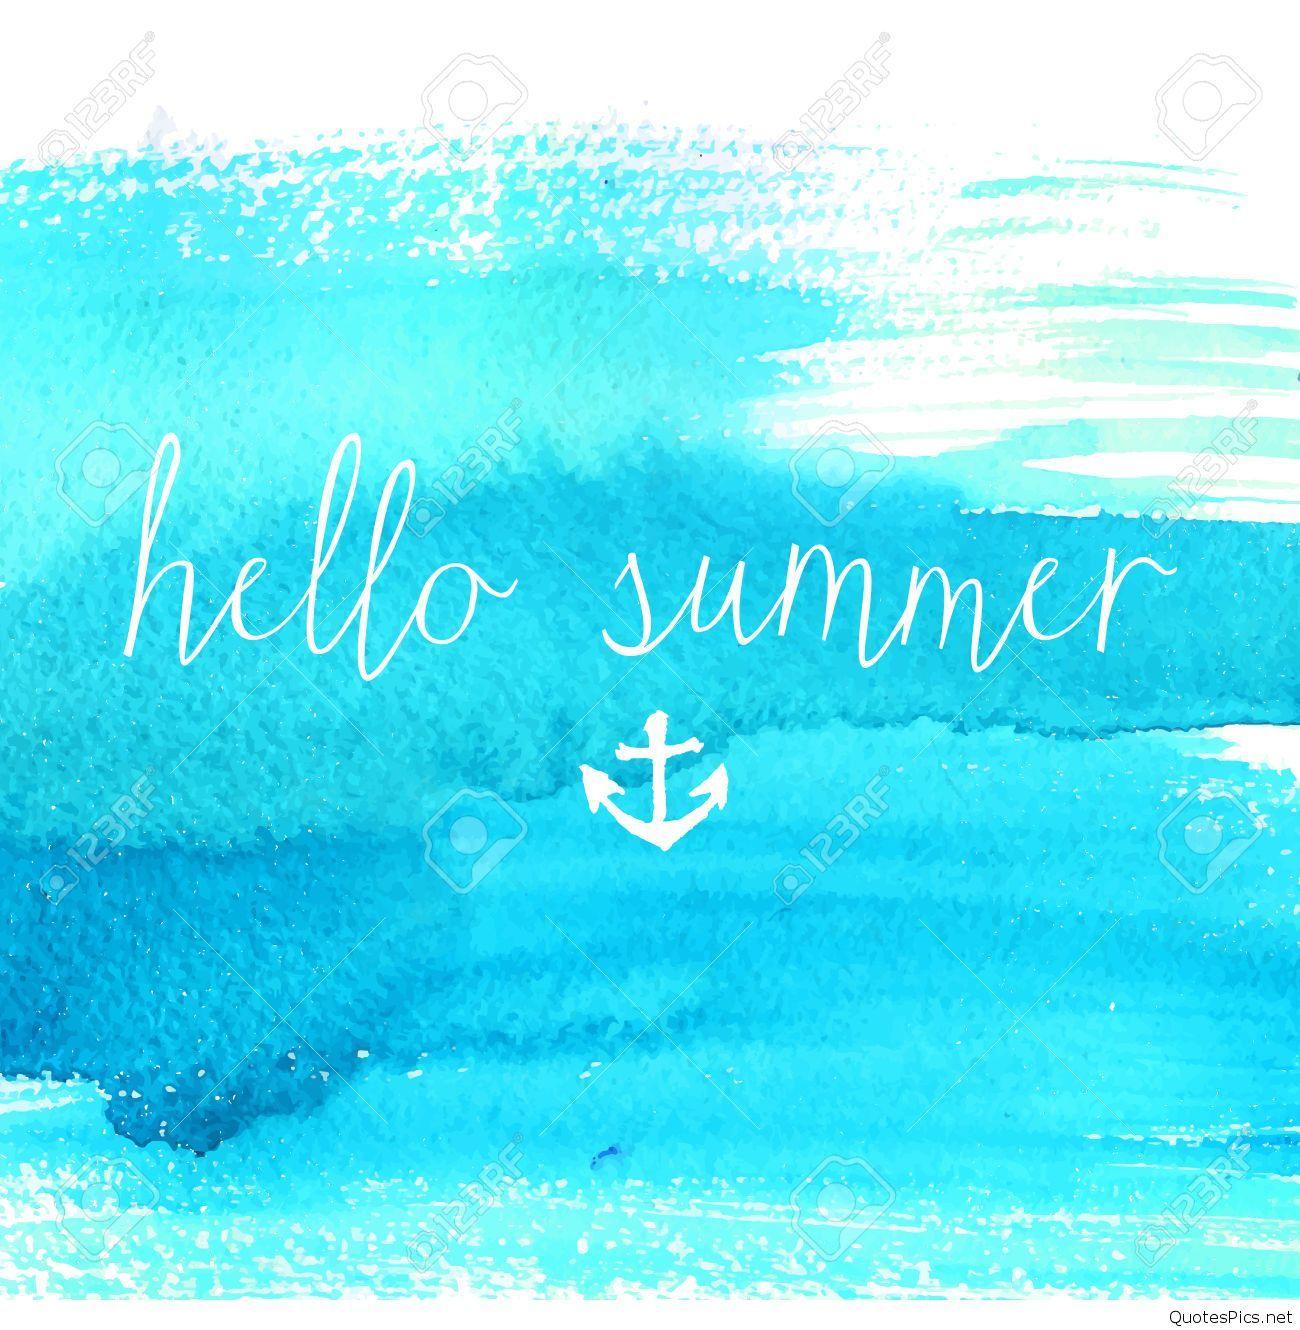 Hello Summer HD Free Wallpaper With Love Inspiring Quotes